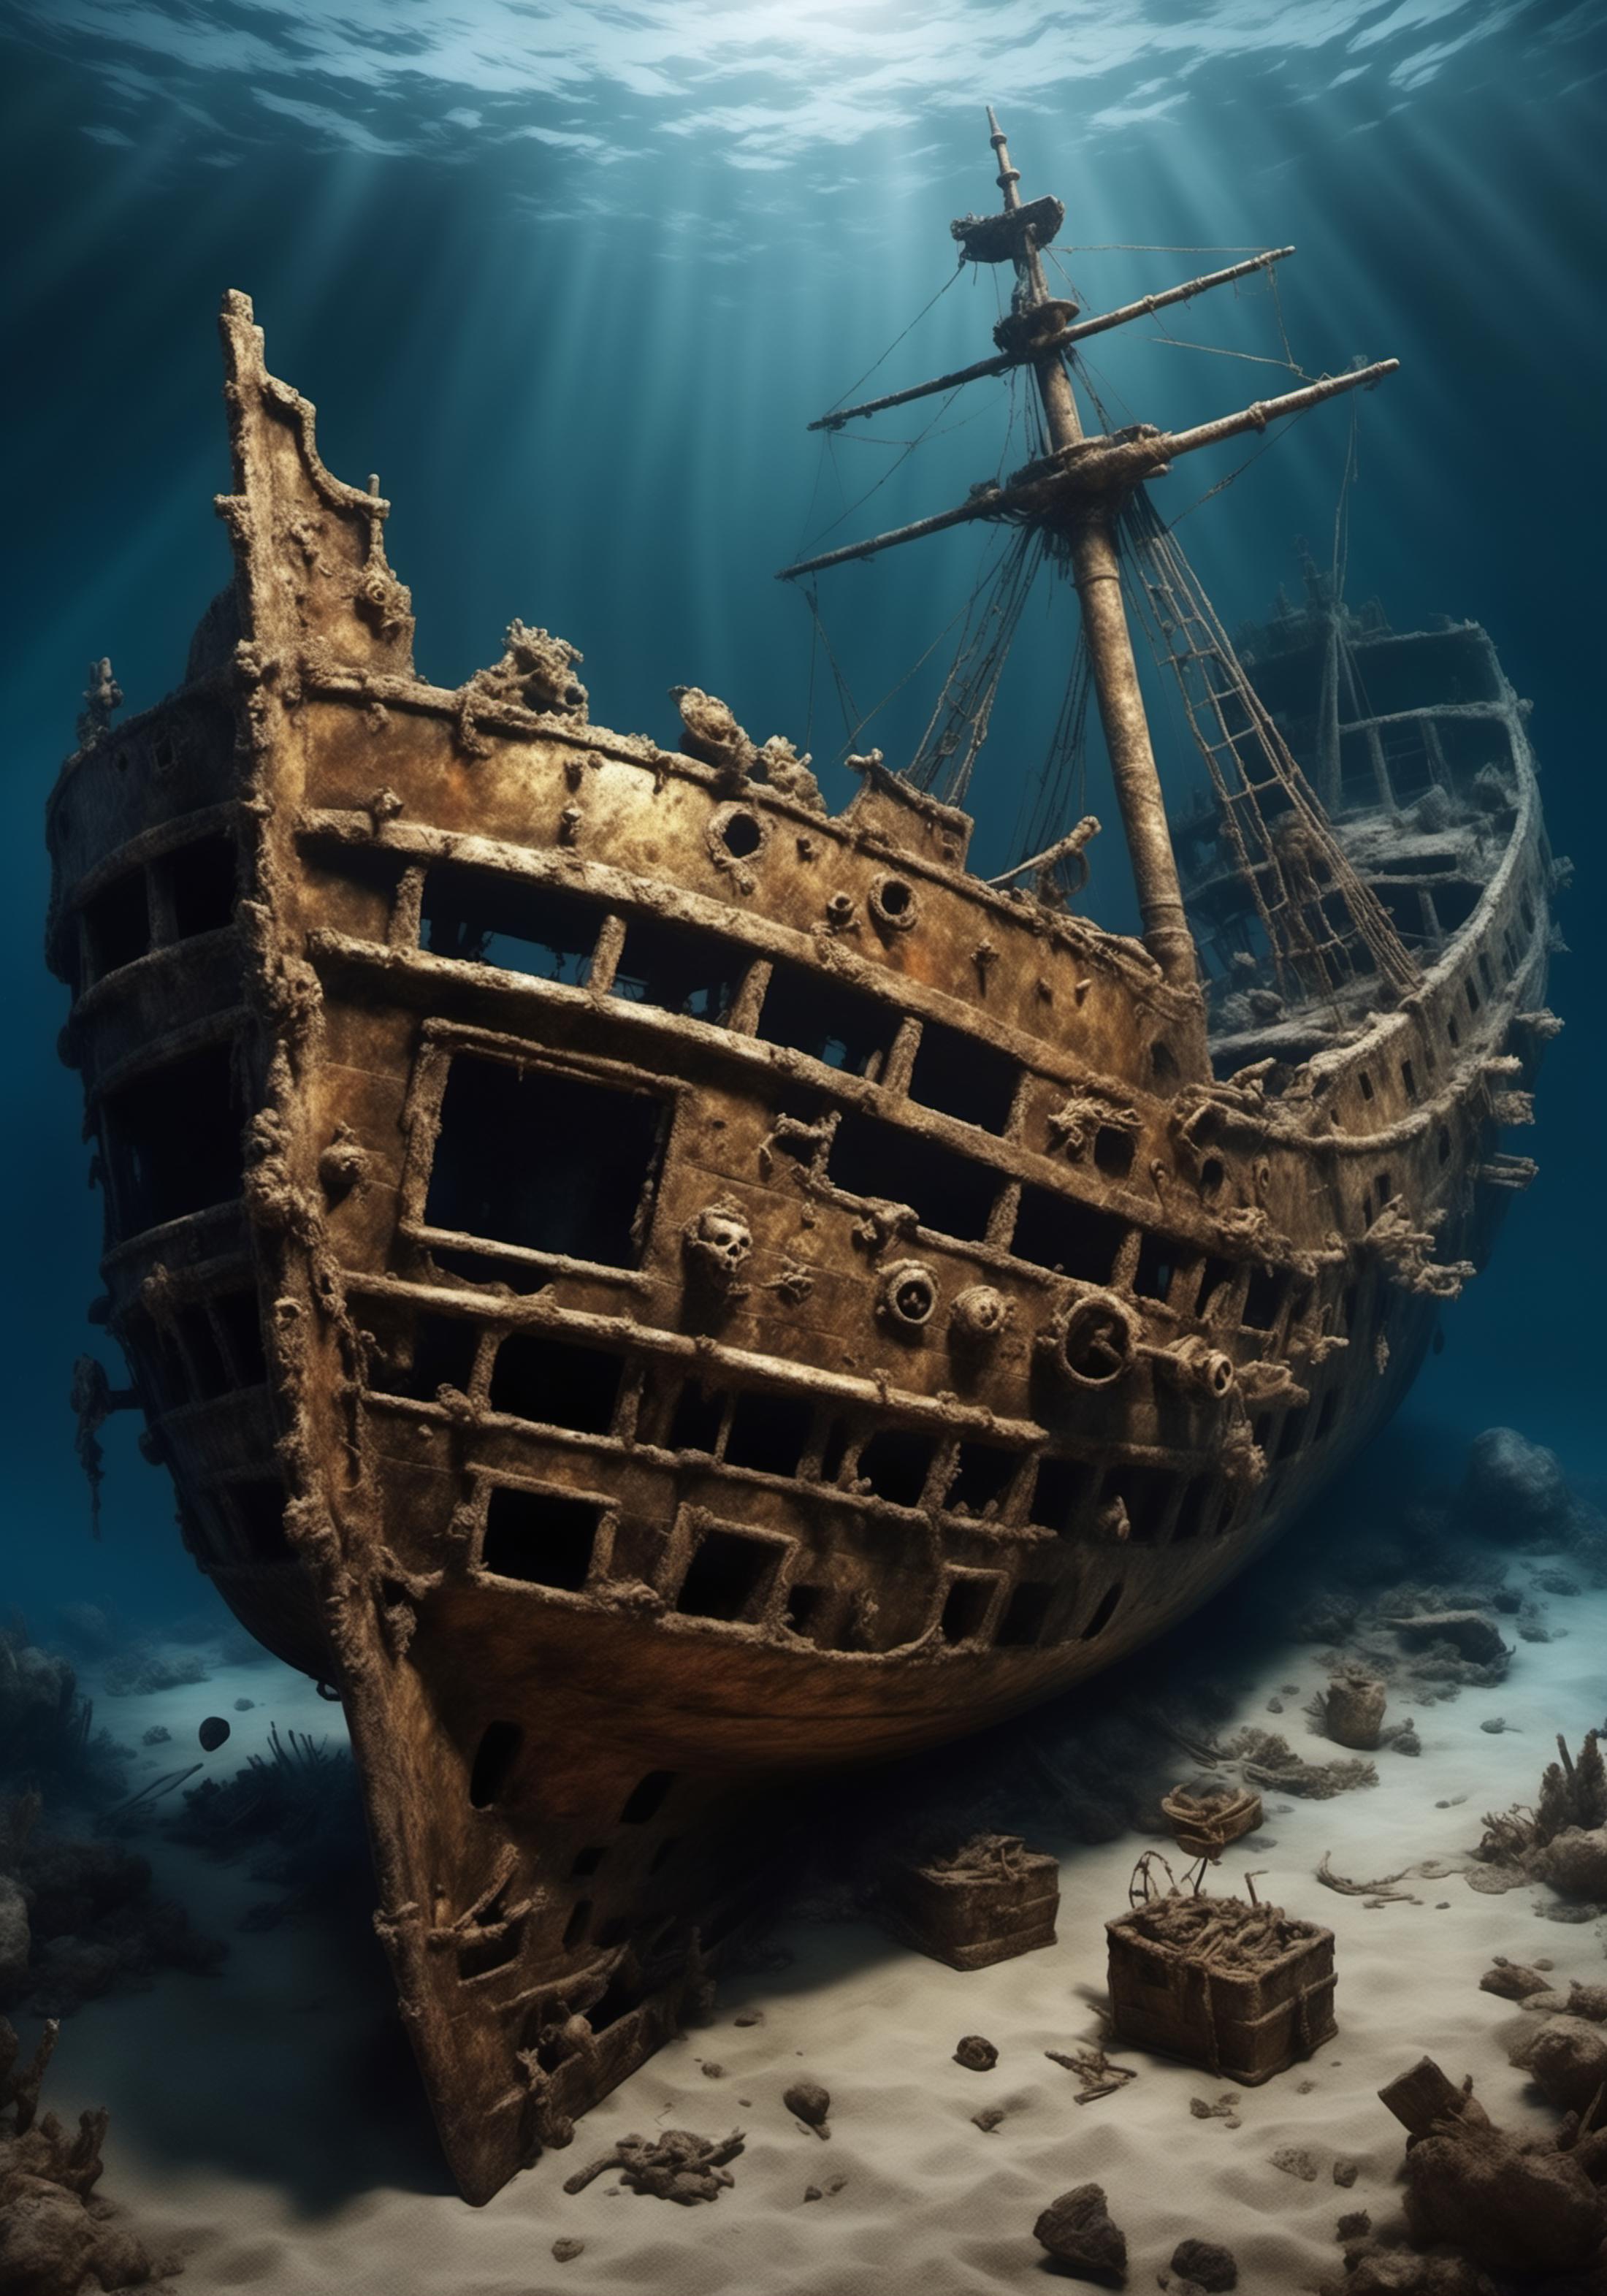 An old wooden shipwreck with a mast and sail in the ocean.